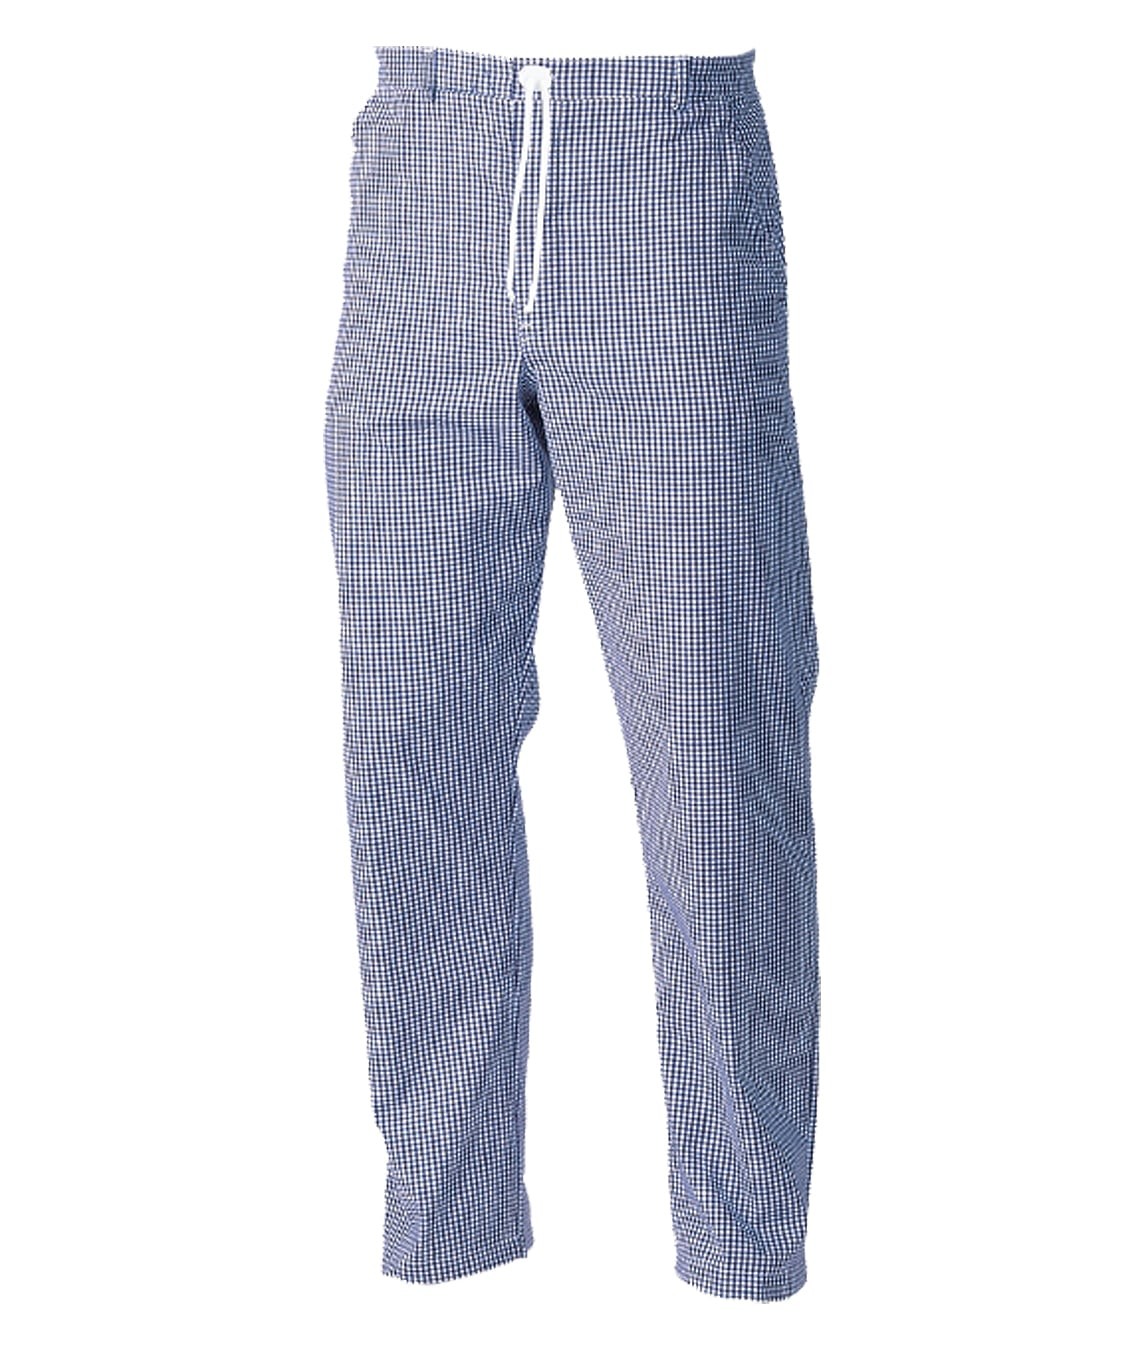 Chef's Trousers: Unisex Blue Check